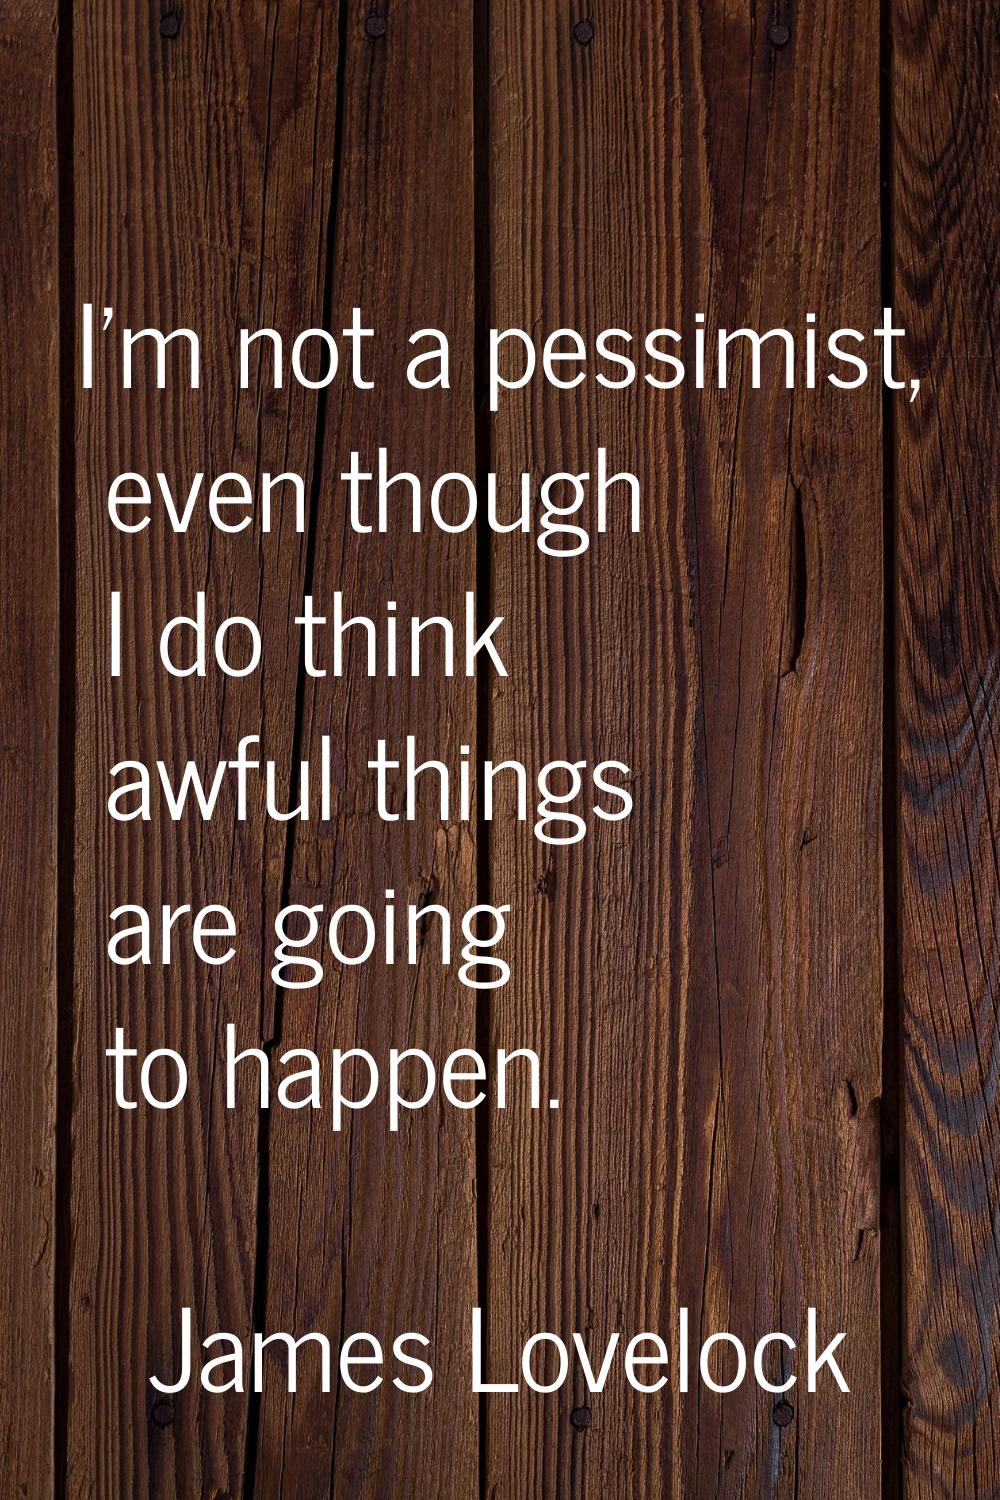 I'm not a pessimist, even though I do think awful things are going to happen.